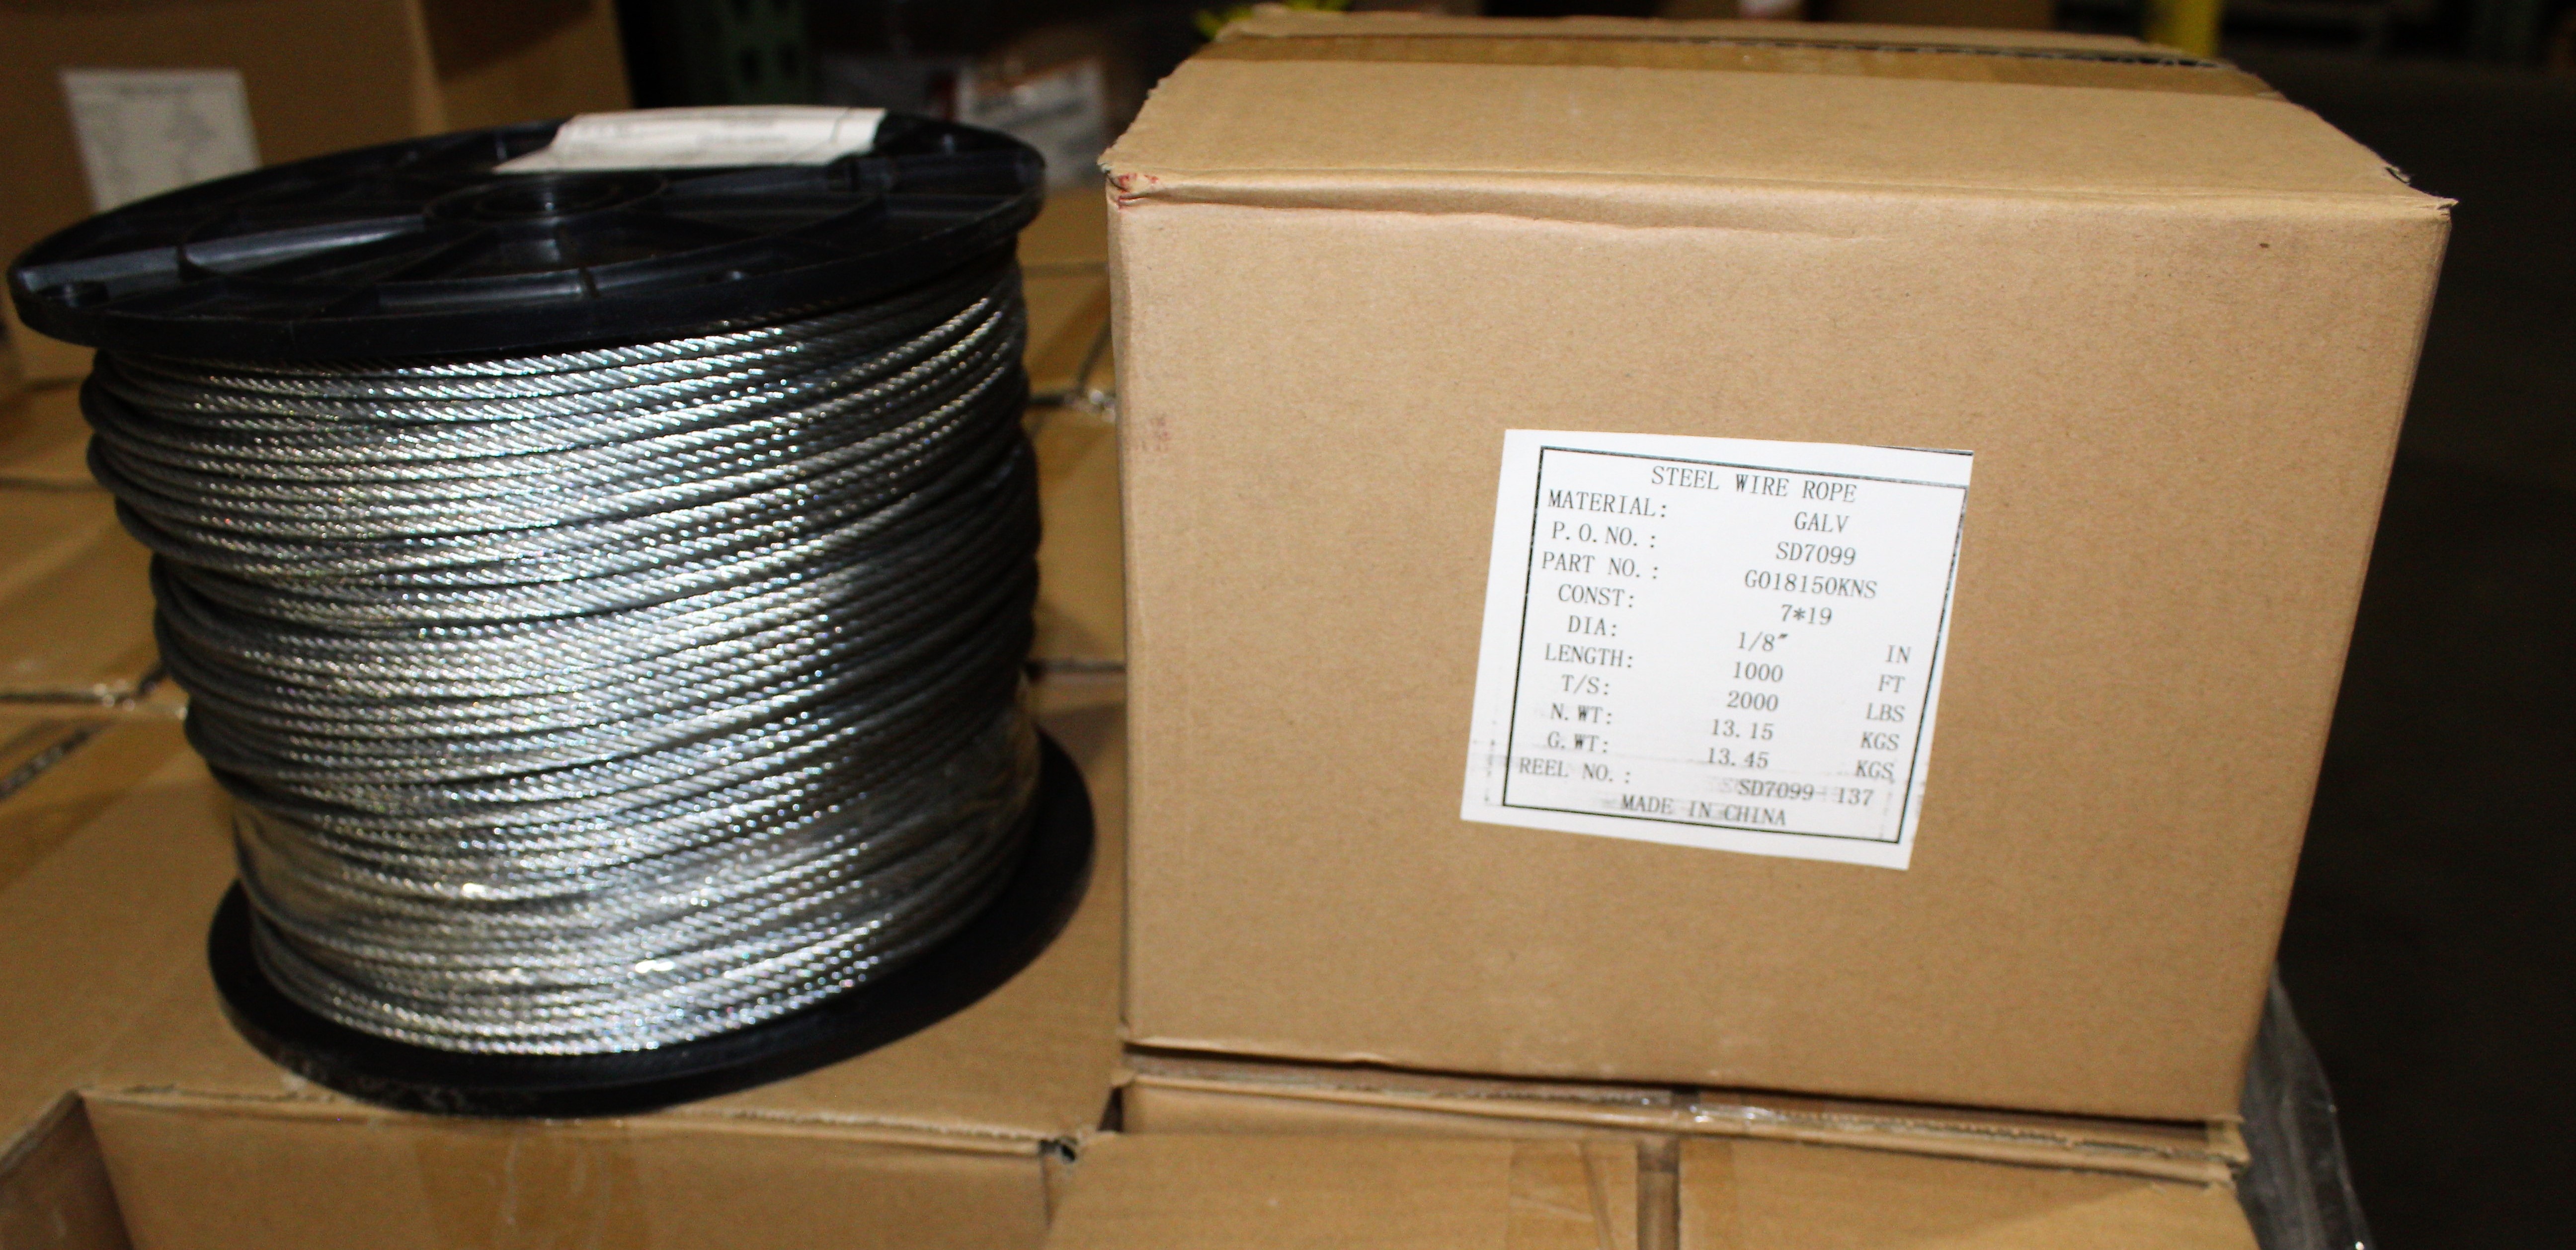 1/16, 3/32, 1/8, 3/16, 1/4, 5/16 & 3/8” Galvanized Aircraft Cable